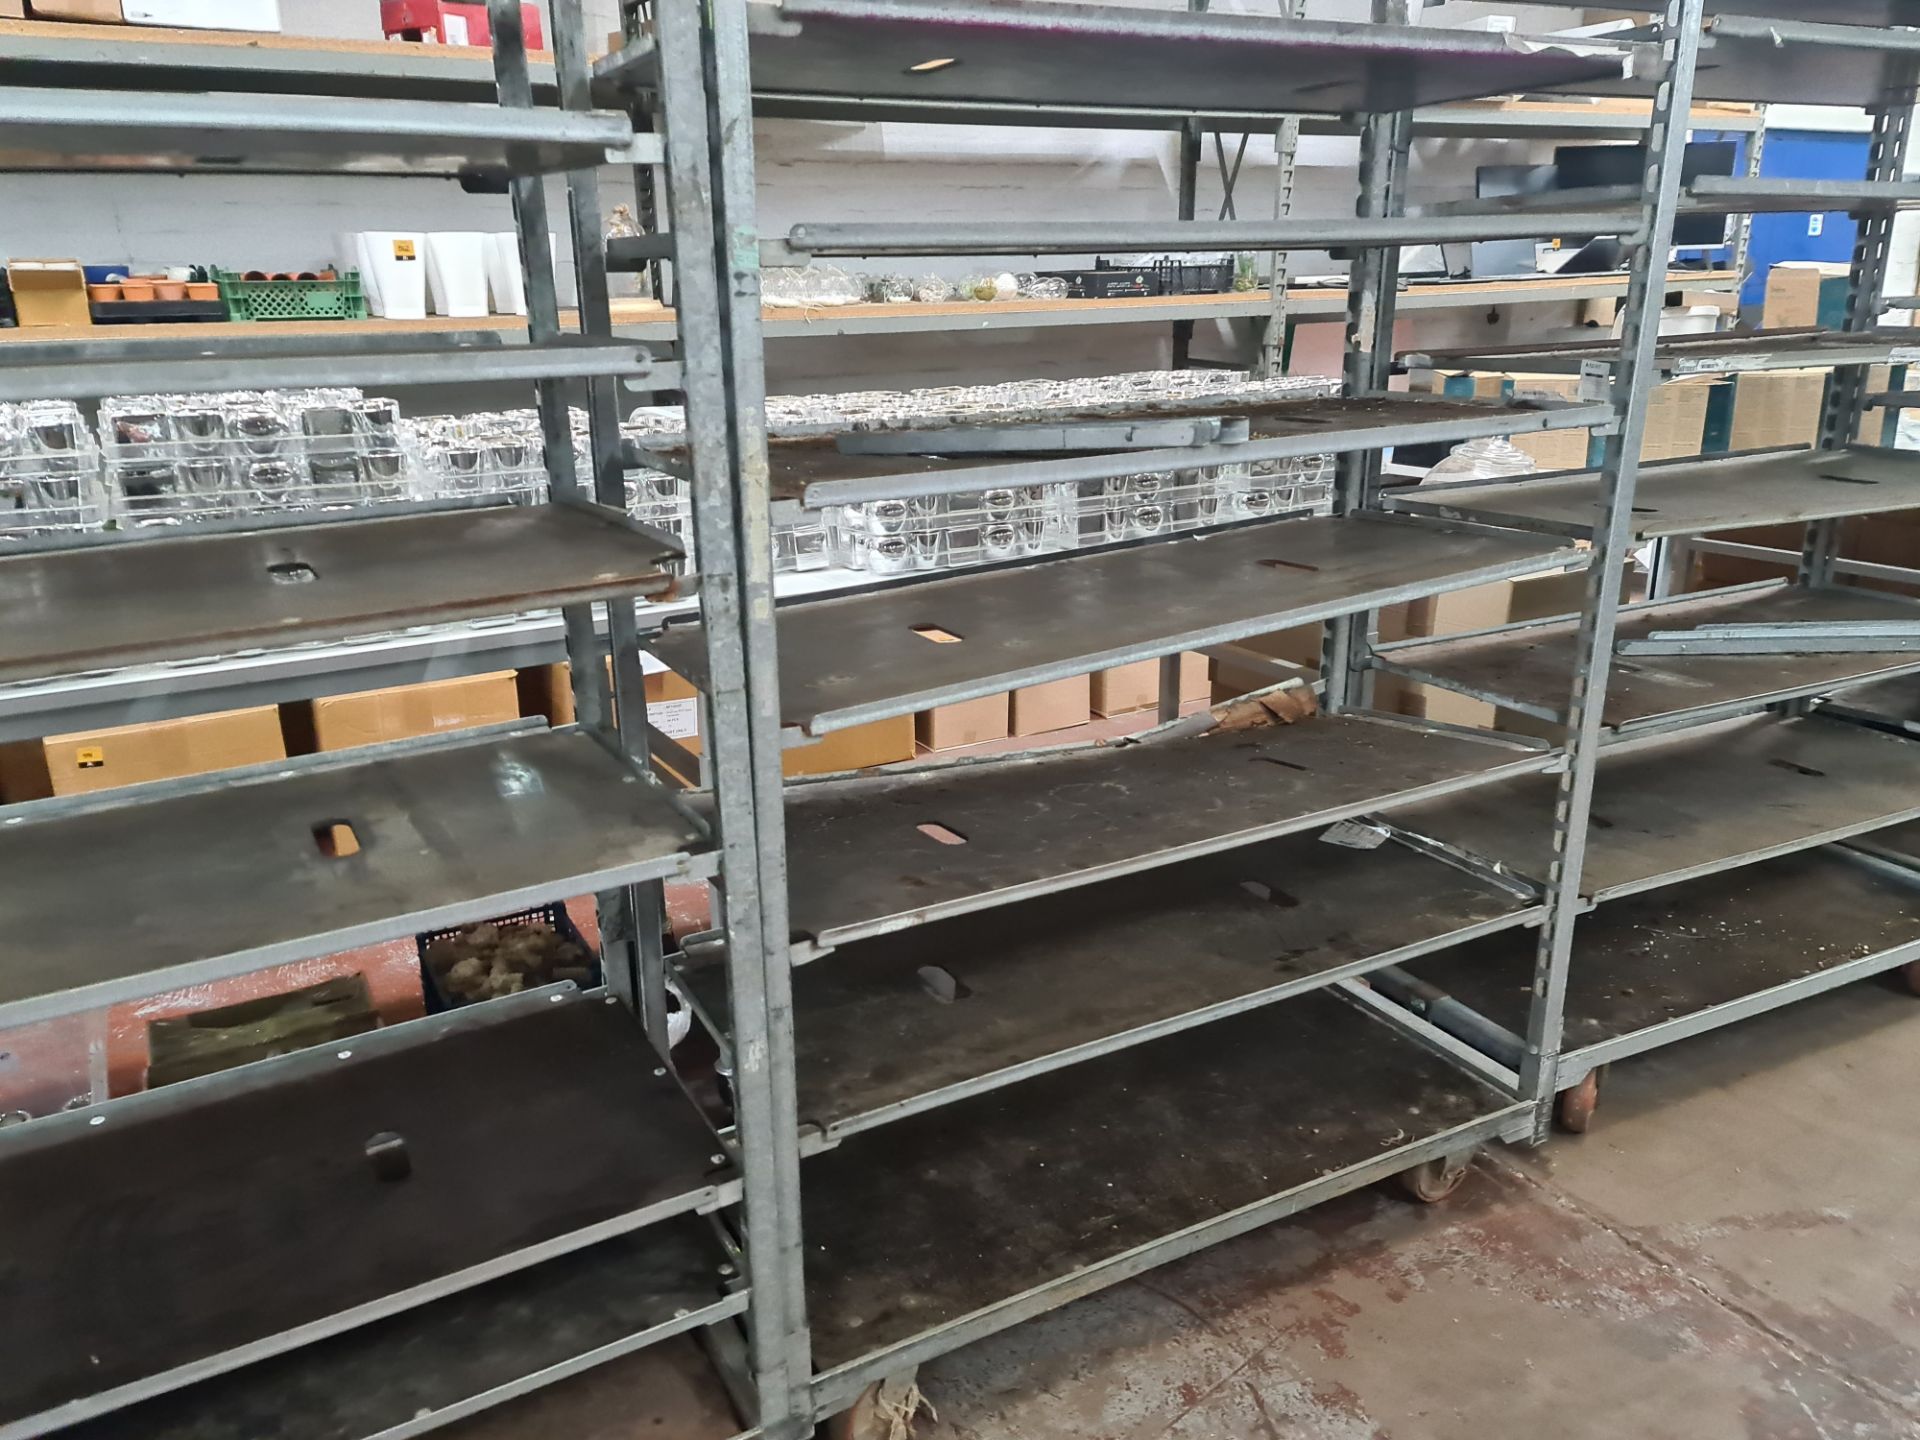 4 off large rectangular trollies with adjustable shelves for storing small plants - Image 11 of 13